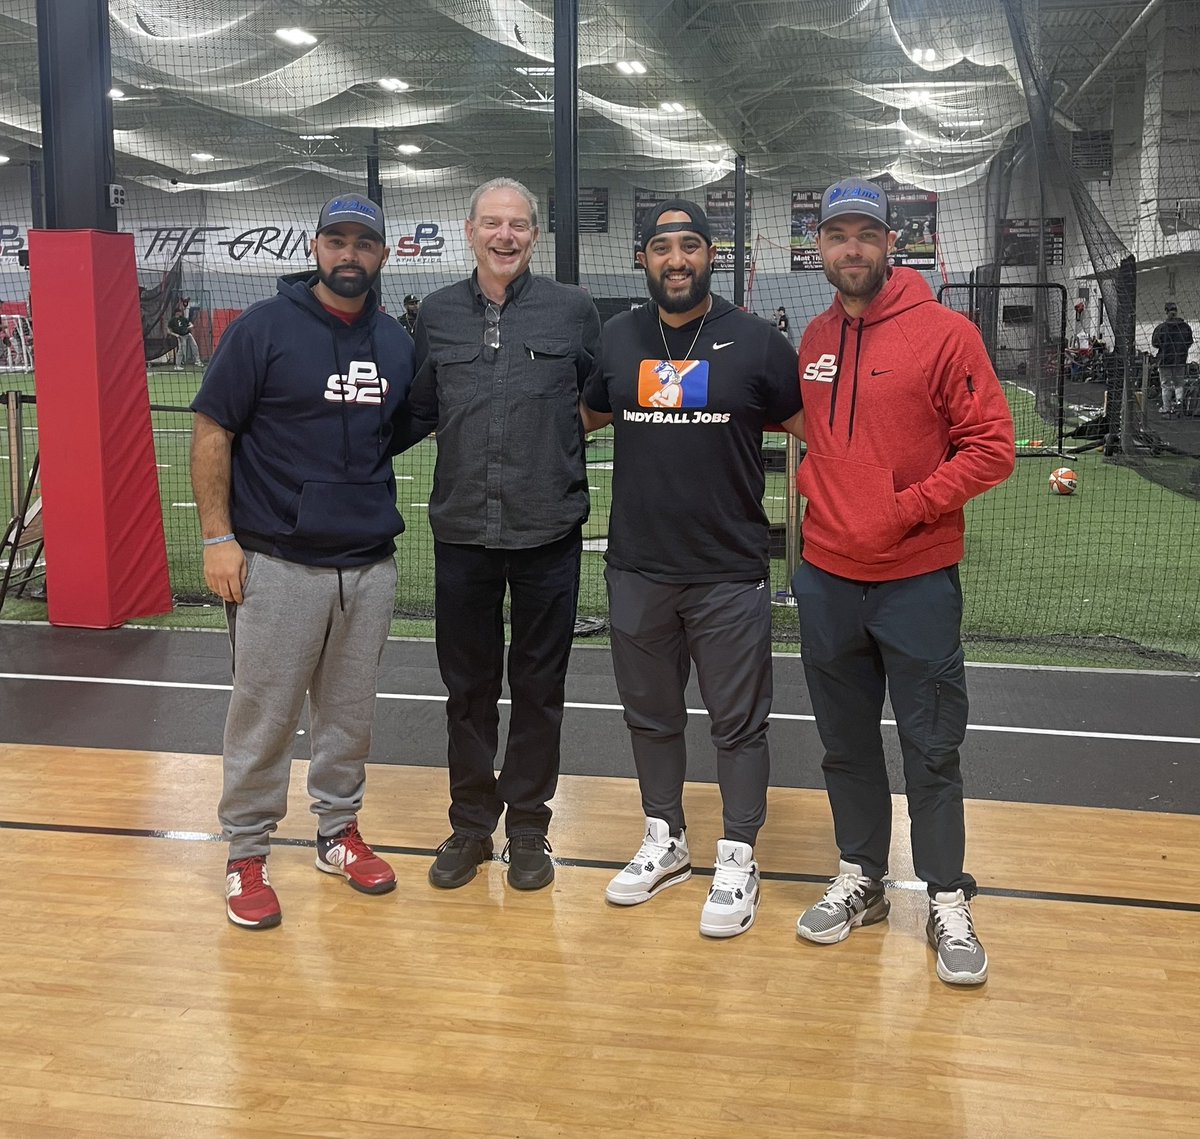 The Jackals are excited to announce their partnership with @PS2athletics for 2024 and beyond! PS2 in Wayne is the area’s premier sports and athletics training facility. We look forward to working together on the field and in the community! ⚾️🔥💪